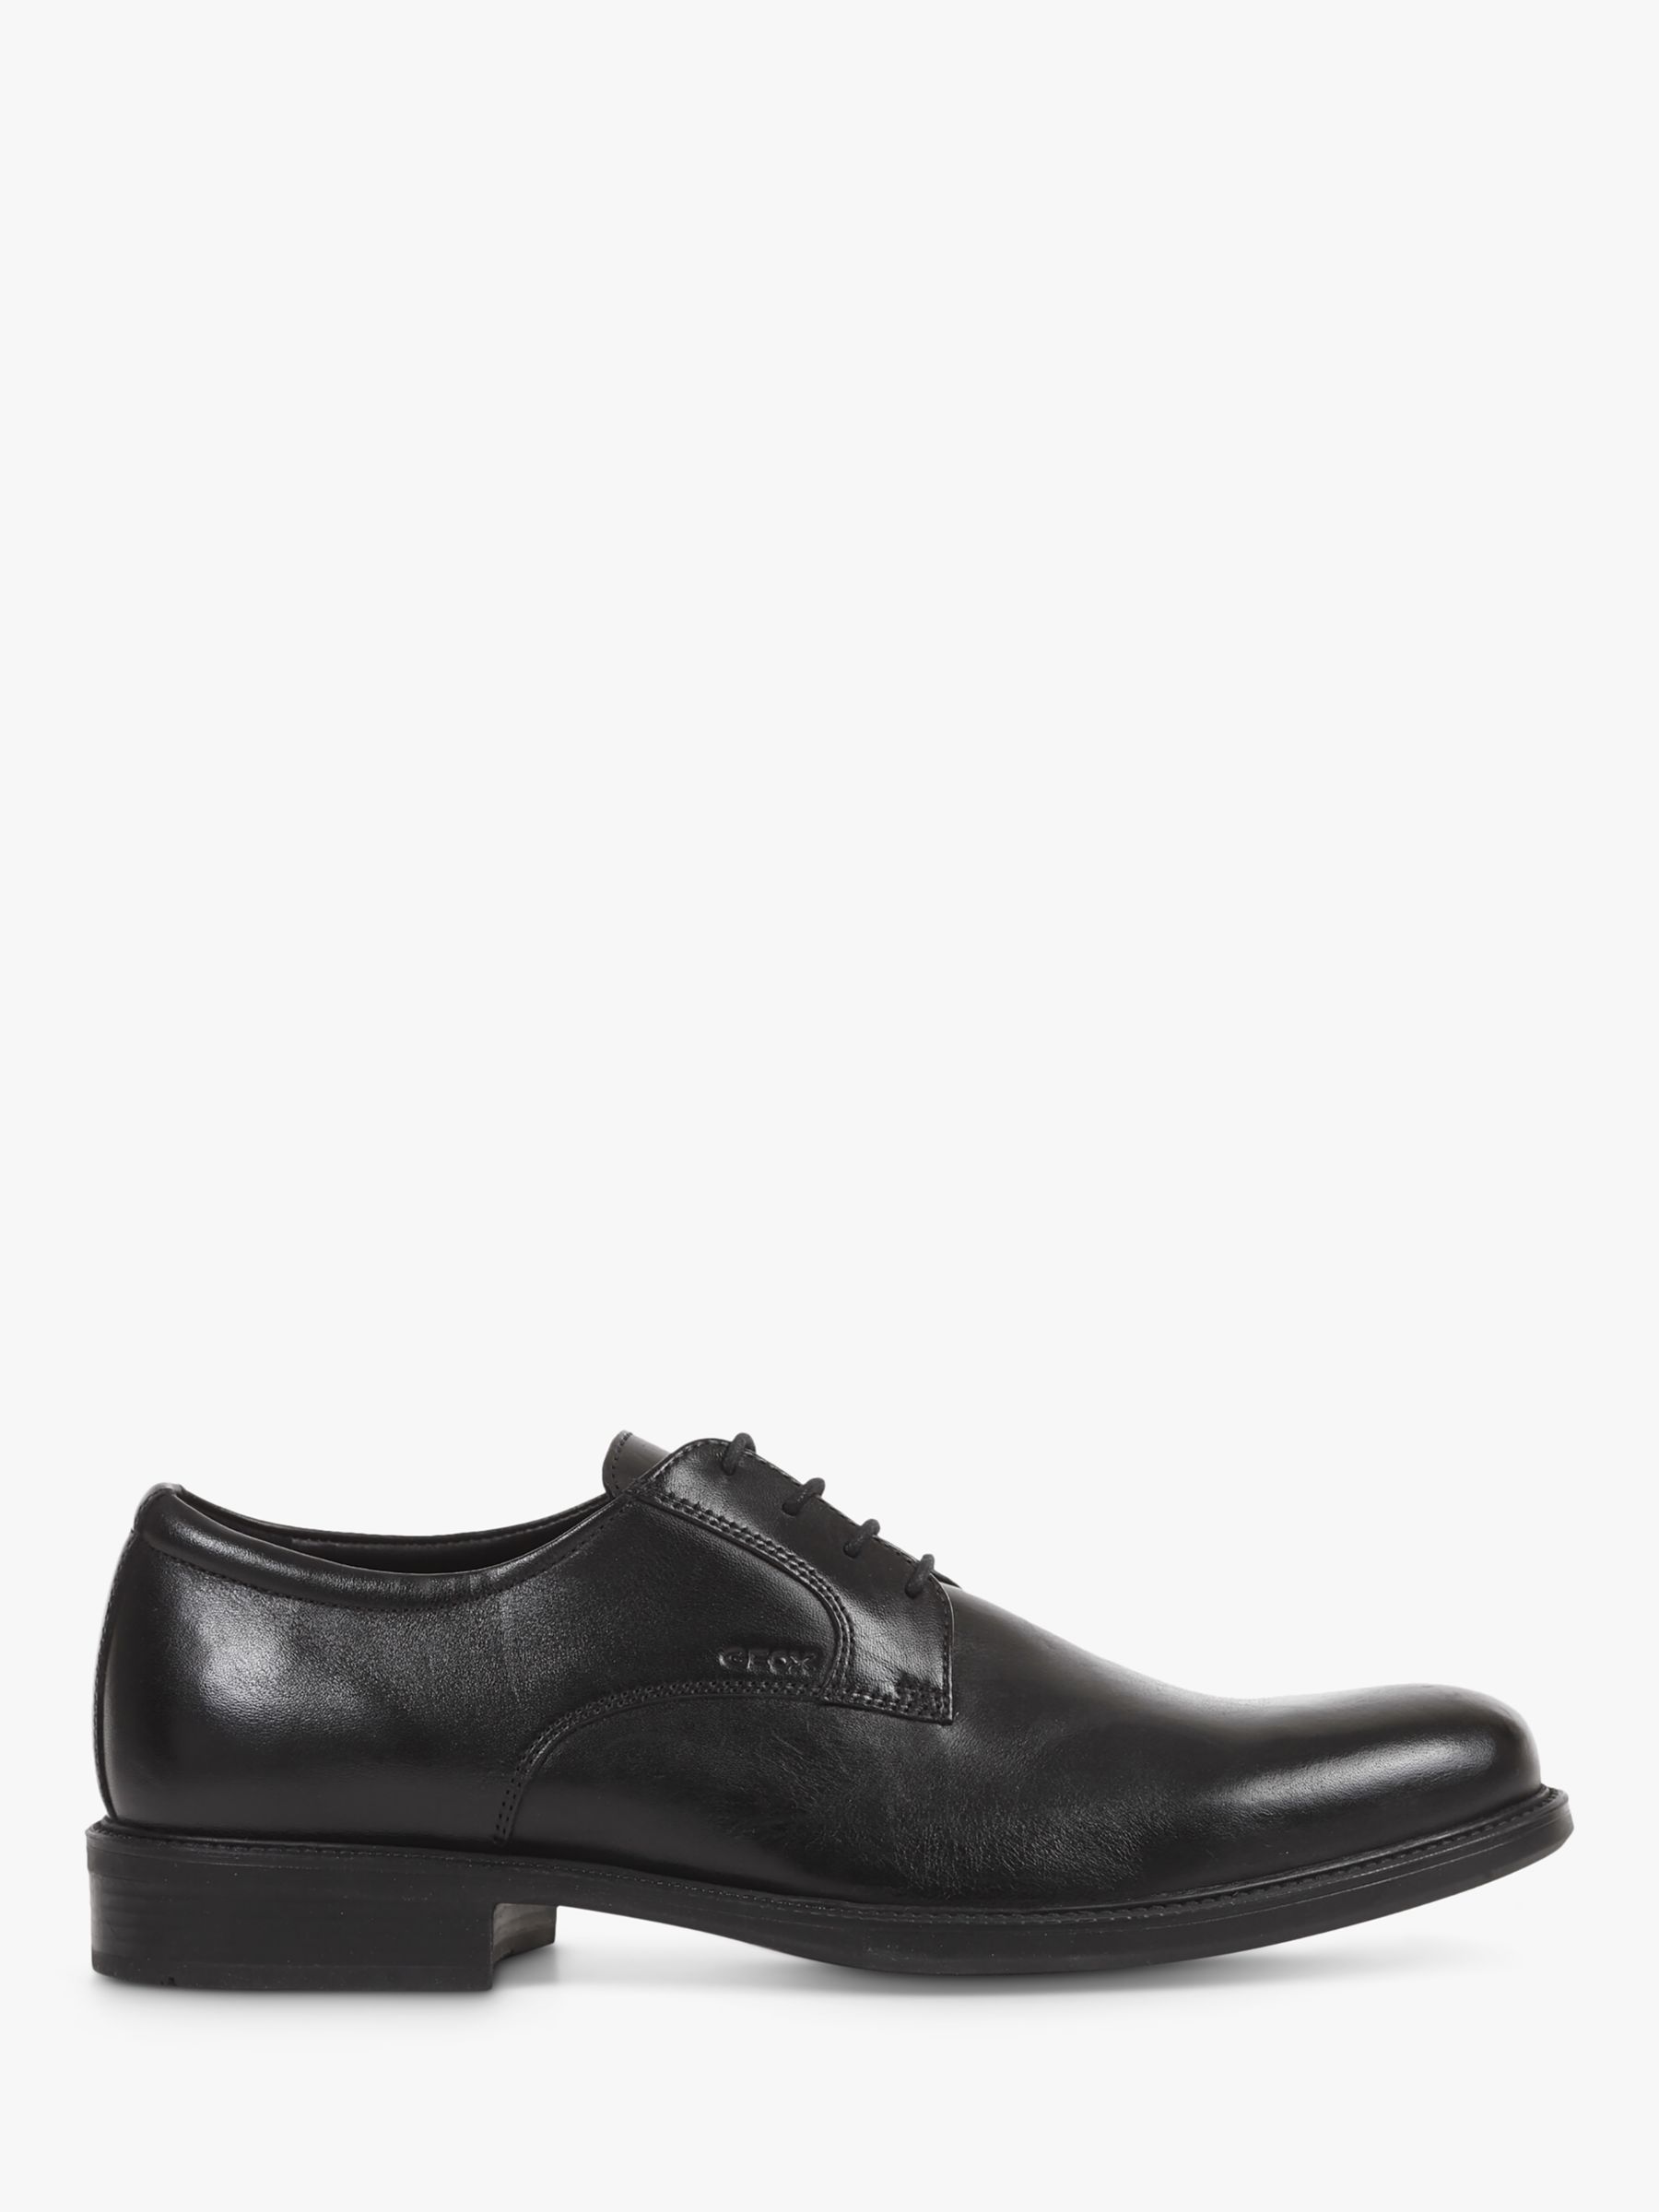 Geox Carnaby Leather Lace Up Derby Shoes, Black at John Lewis & Partners